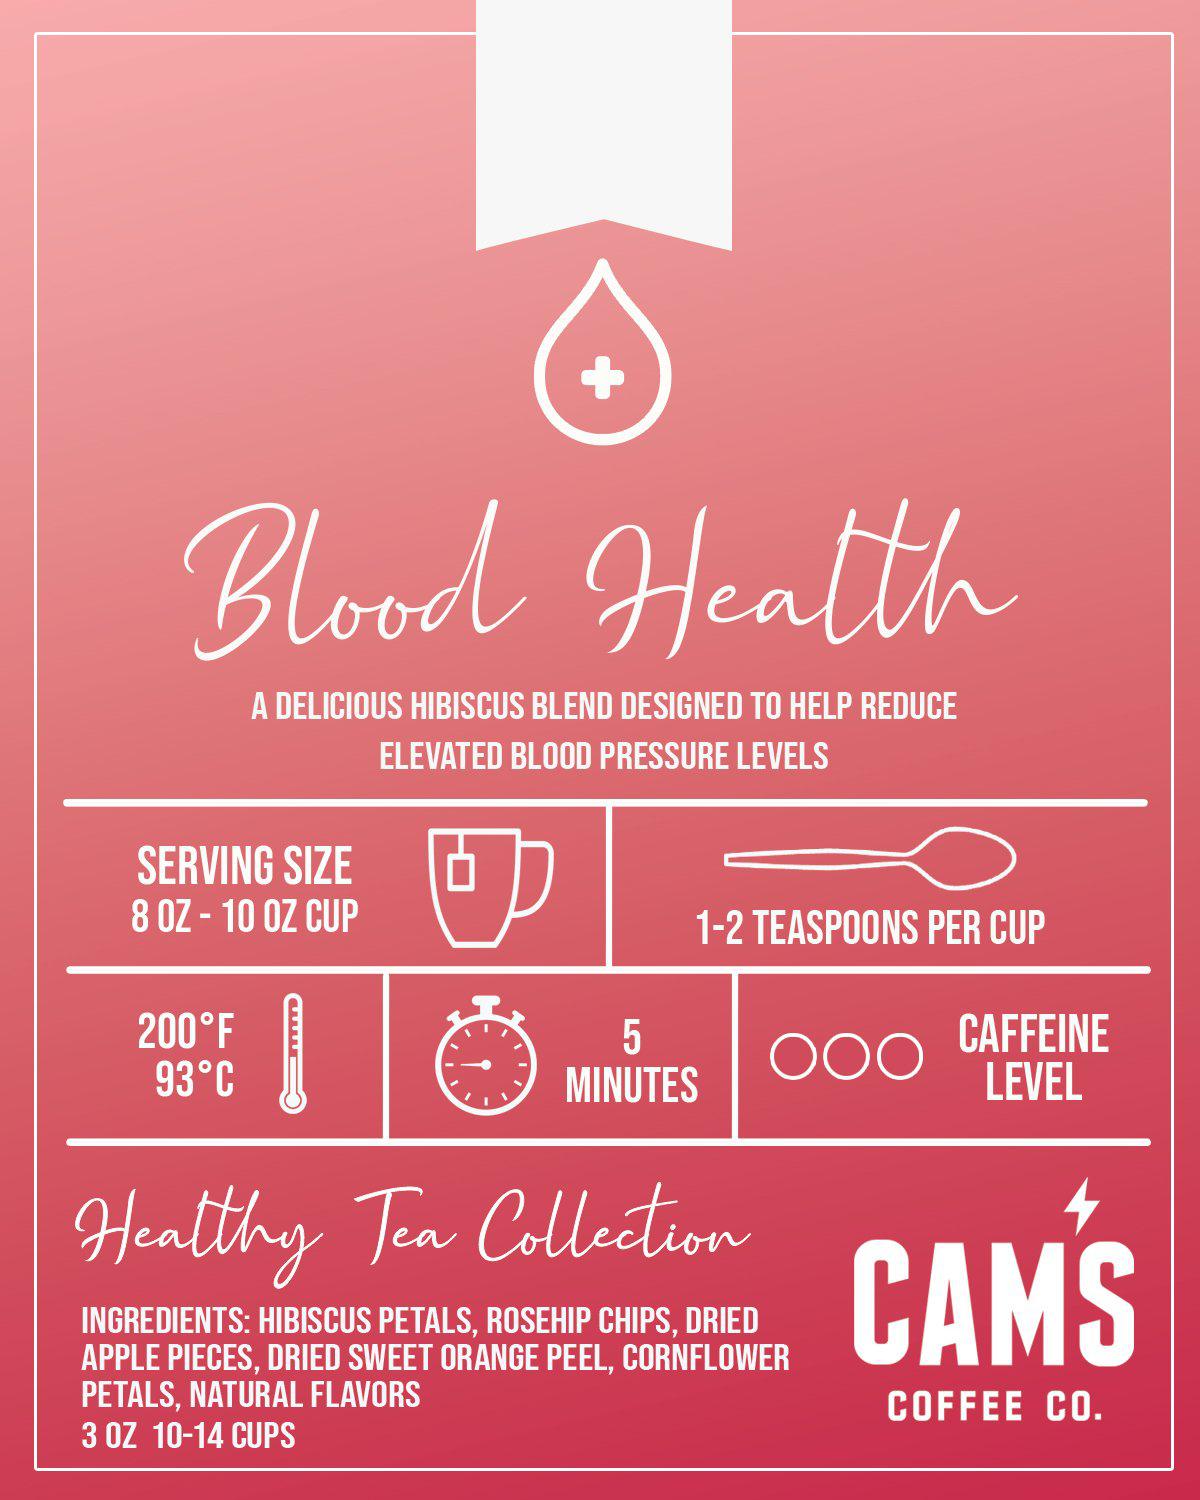 Blood Purifying Tea - Blood Cleansing Tea | Cam's Coffee Co.